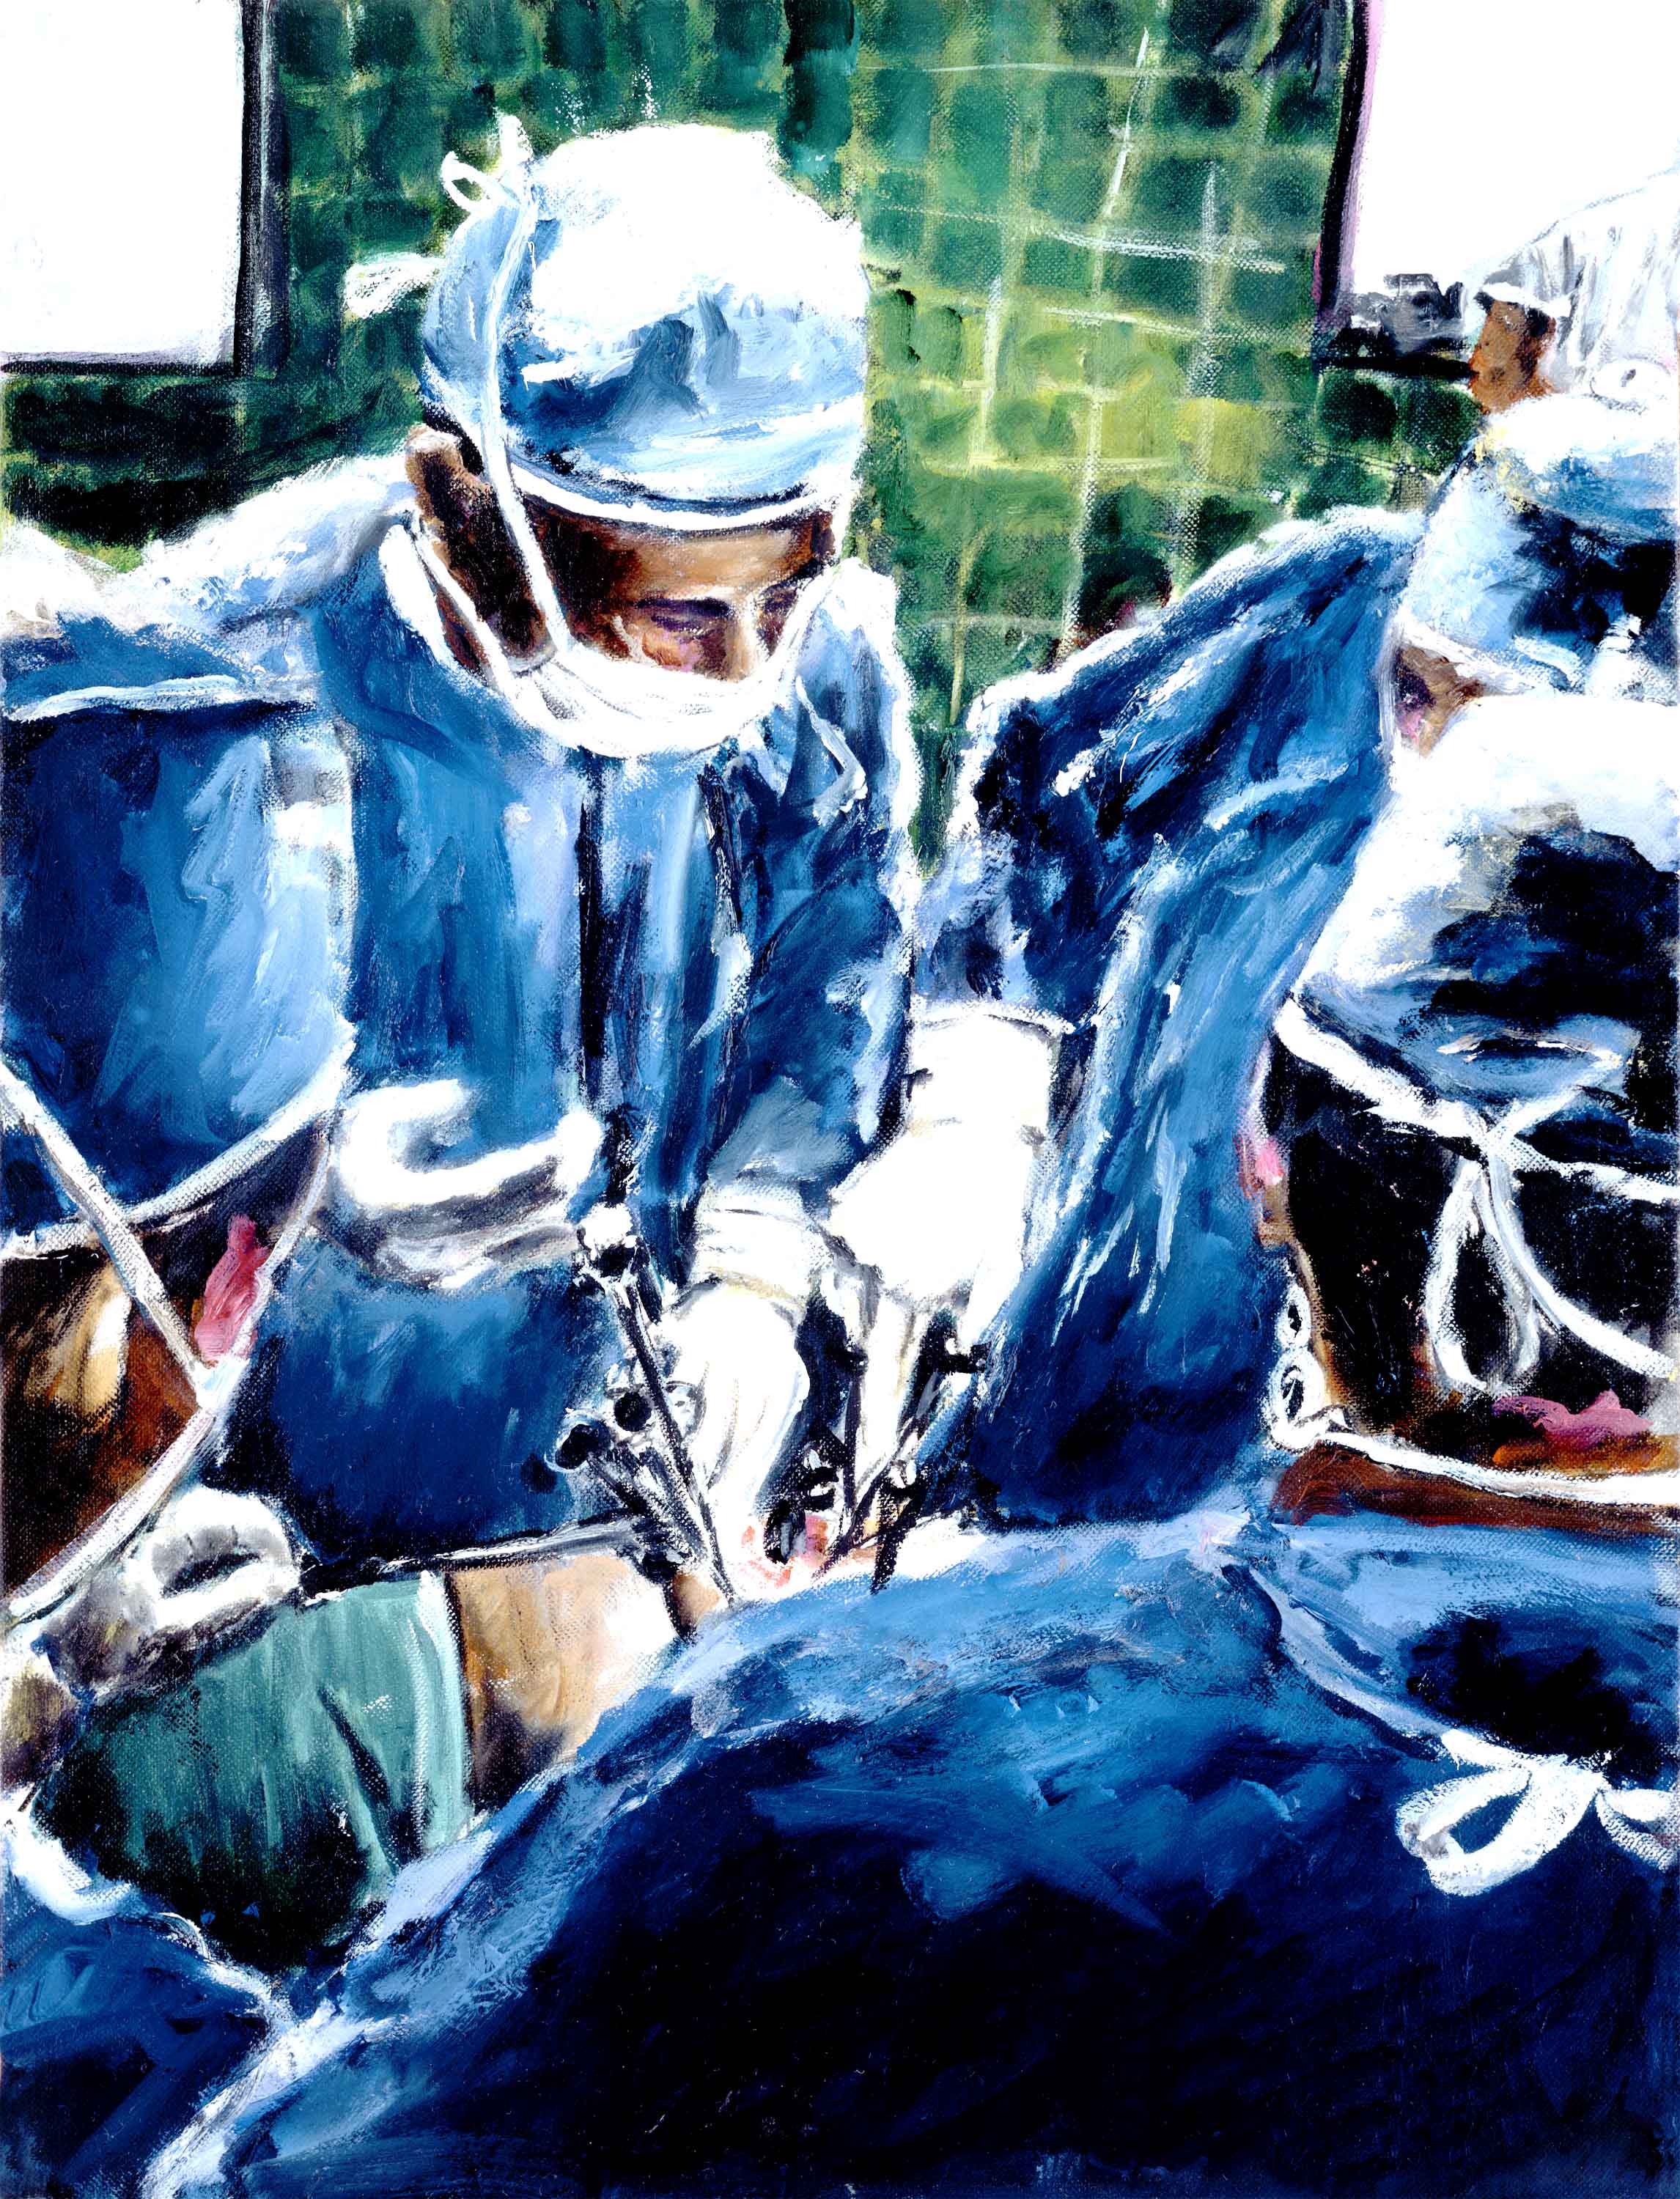 The Surgeons Performing Surgery